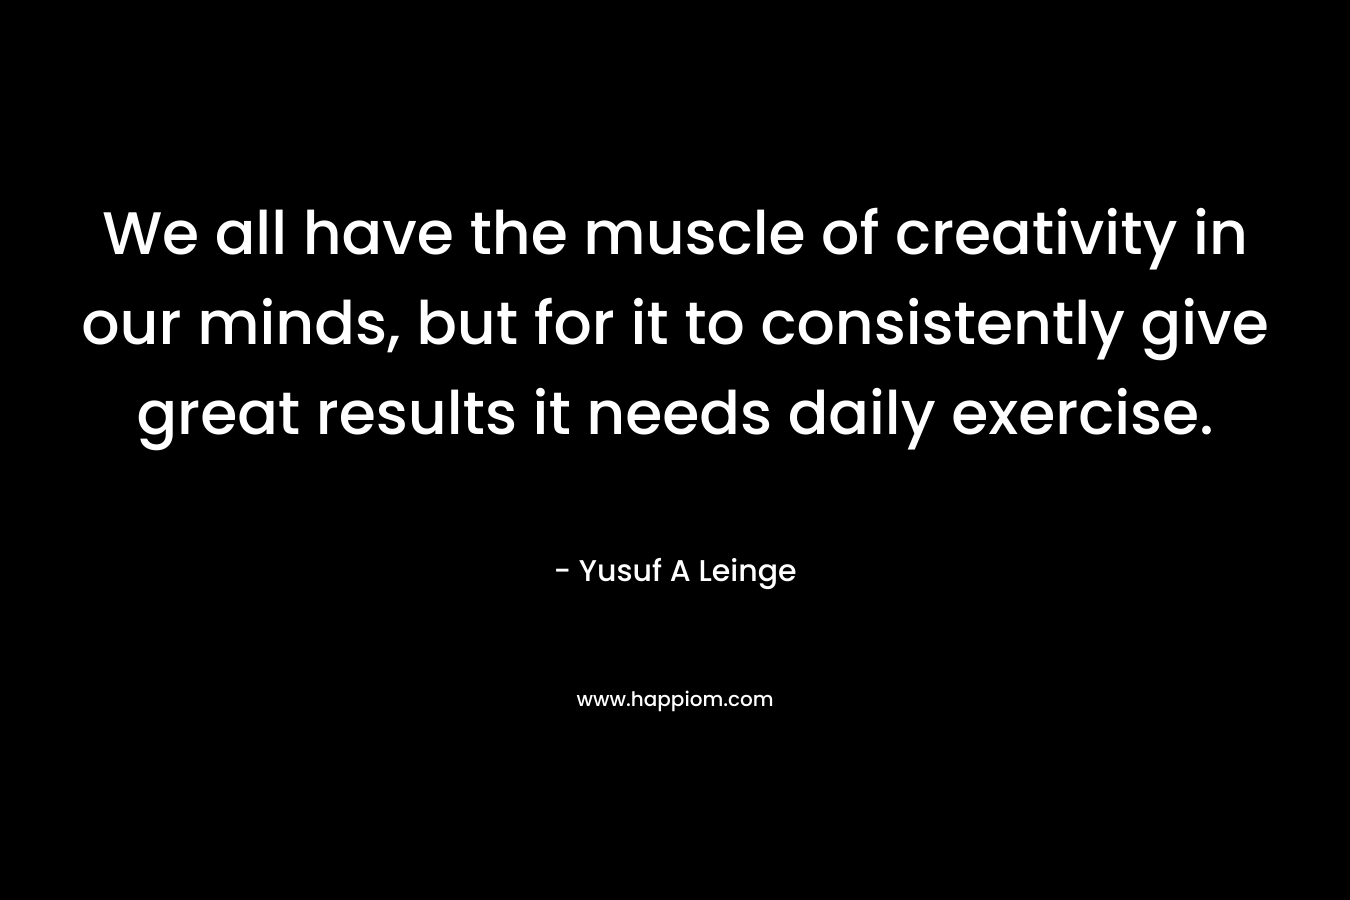 We all have the muscle of creativity in our minds, but for it to consistently give great results it needs daily exercise.